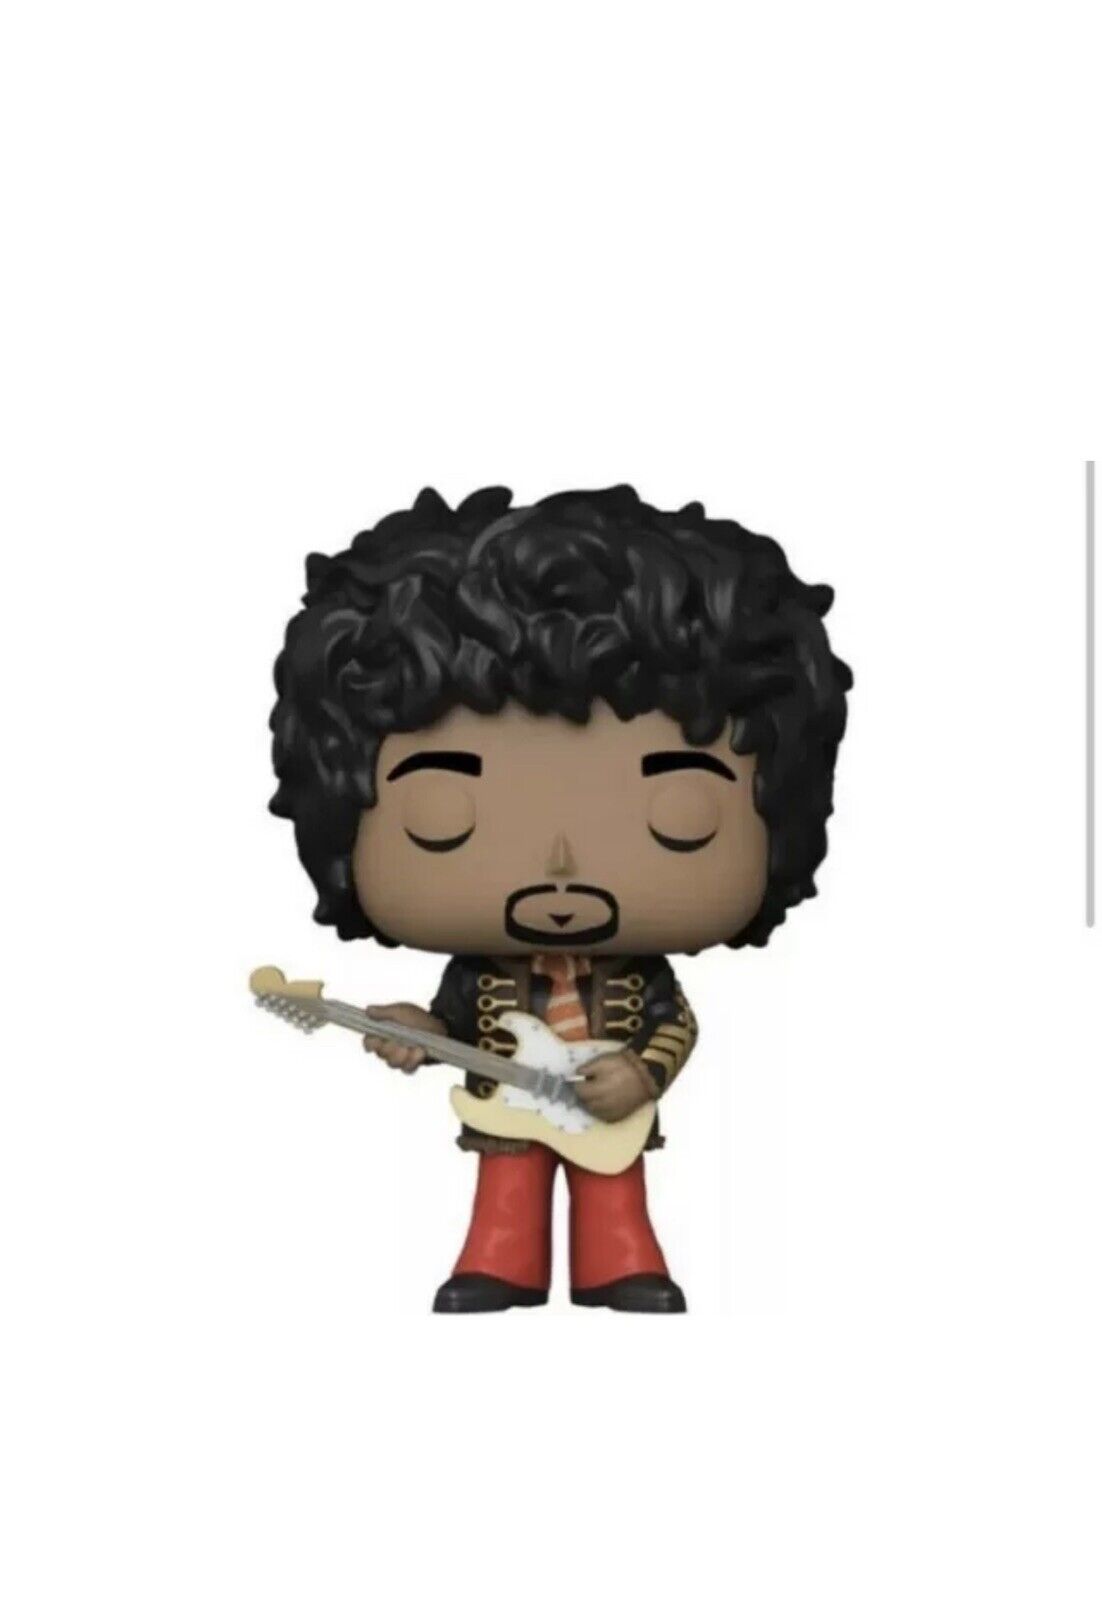 Jimi Hendrix In Napoleonic Jacket Funko Shop Pop Exclusive *SOLD OUT*